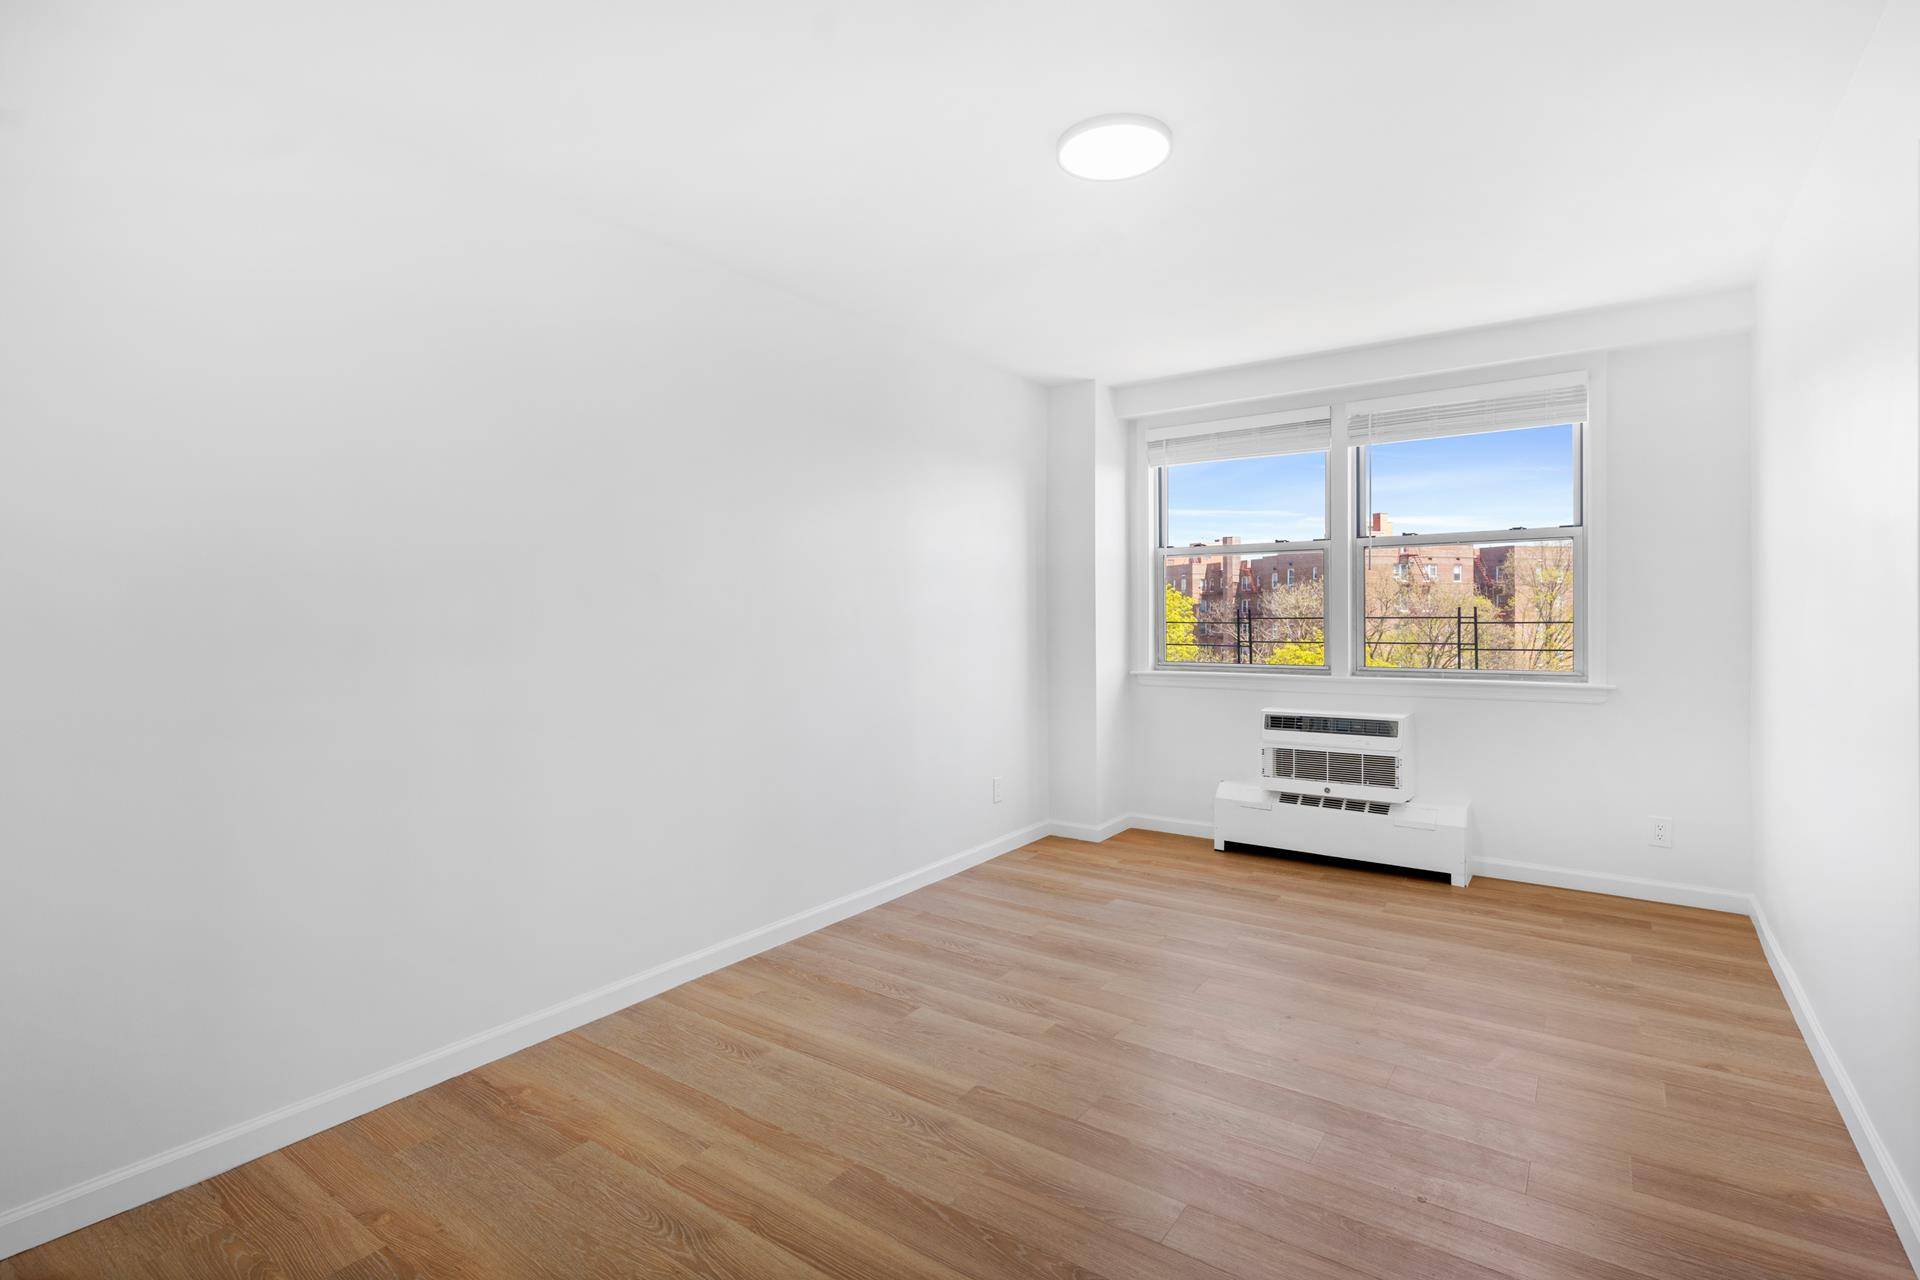 This stunning and rare corner unit has been completely renovated and offers an abundance of natural light throughout its expansive nearly 1500 square feet of living space.